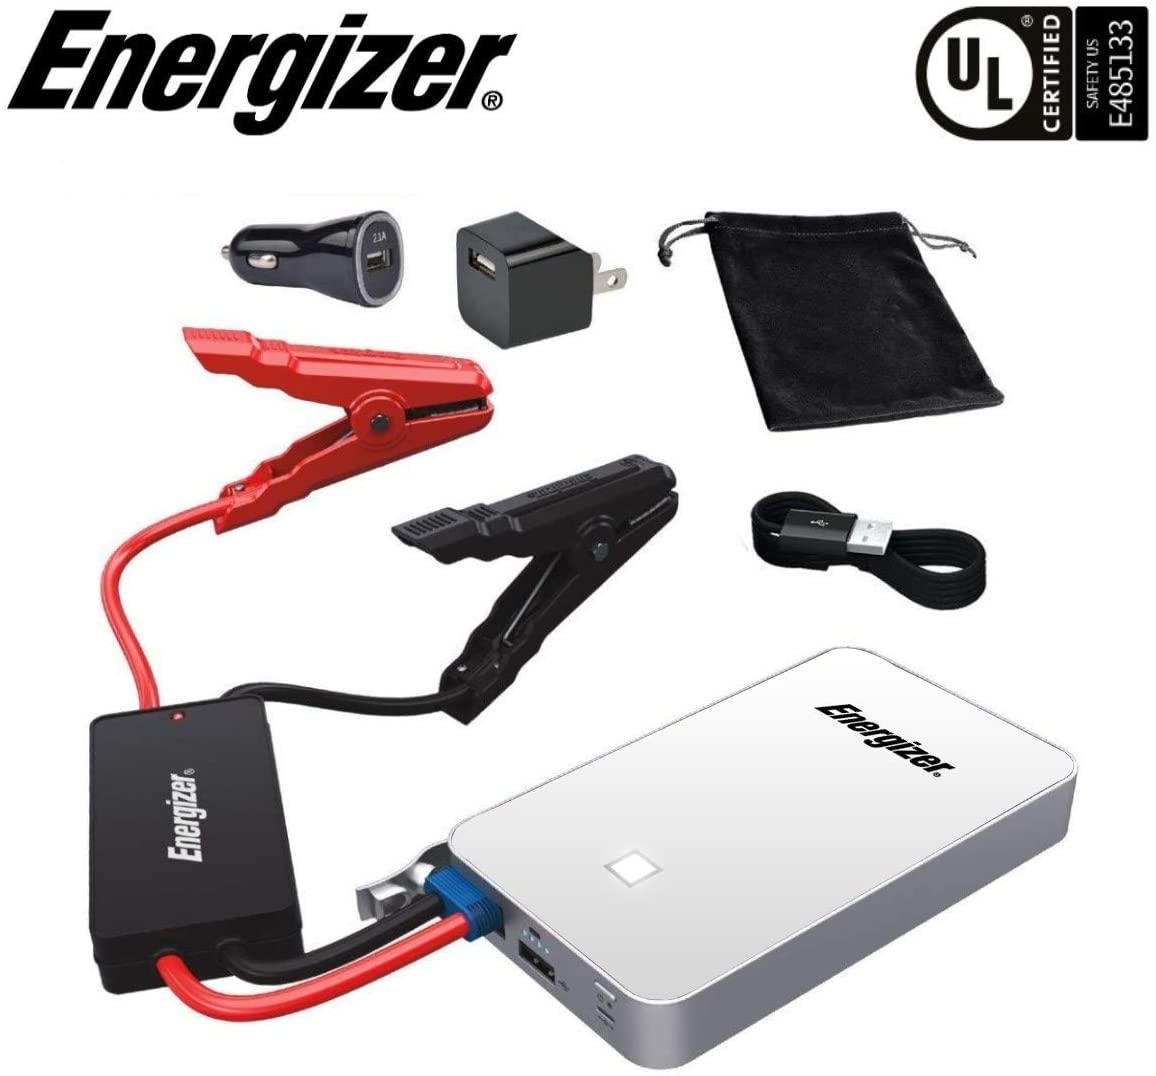 Energizer Heavy Duty Jump Starter 7500mAh with Built-In UL Lithium battery - Portable Car Jumper and 2.4A Power Bank USB Charger (White) - Jump-Starters.com roadside assistance store